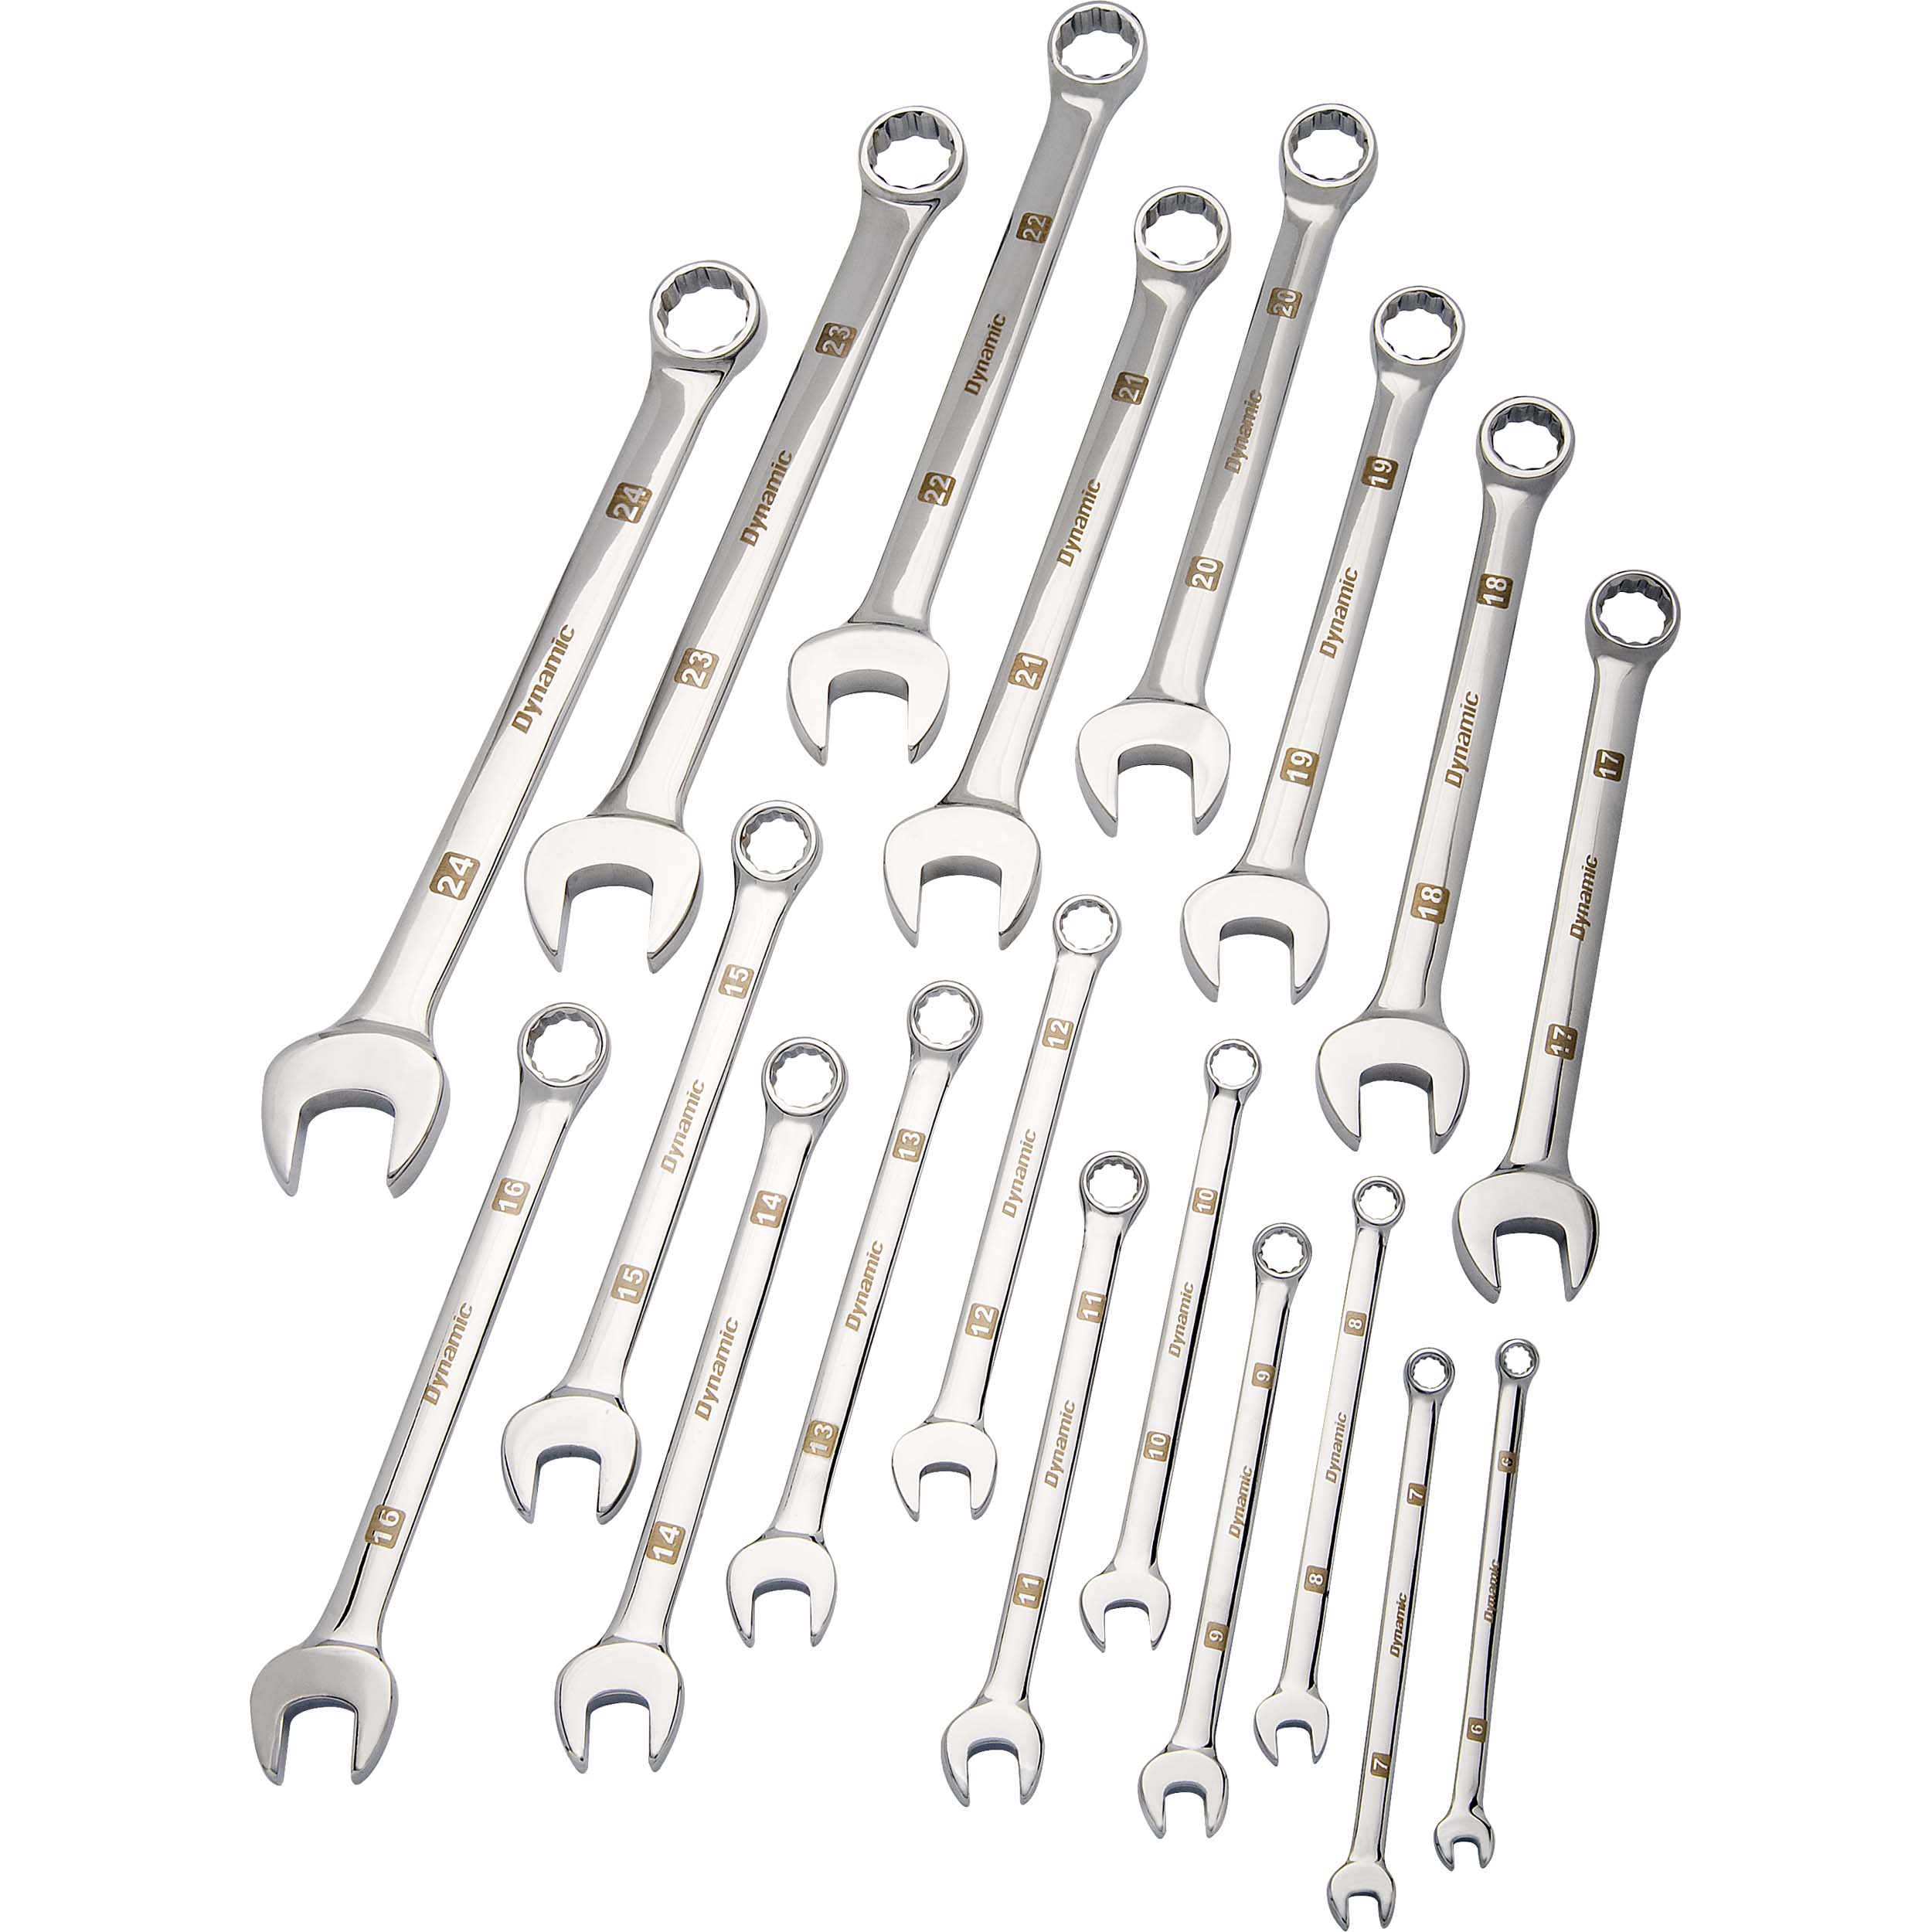 Tools 19pc Metric Combination Wrench Set With Mirror Chrome Finish, 6mm - 24mm